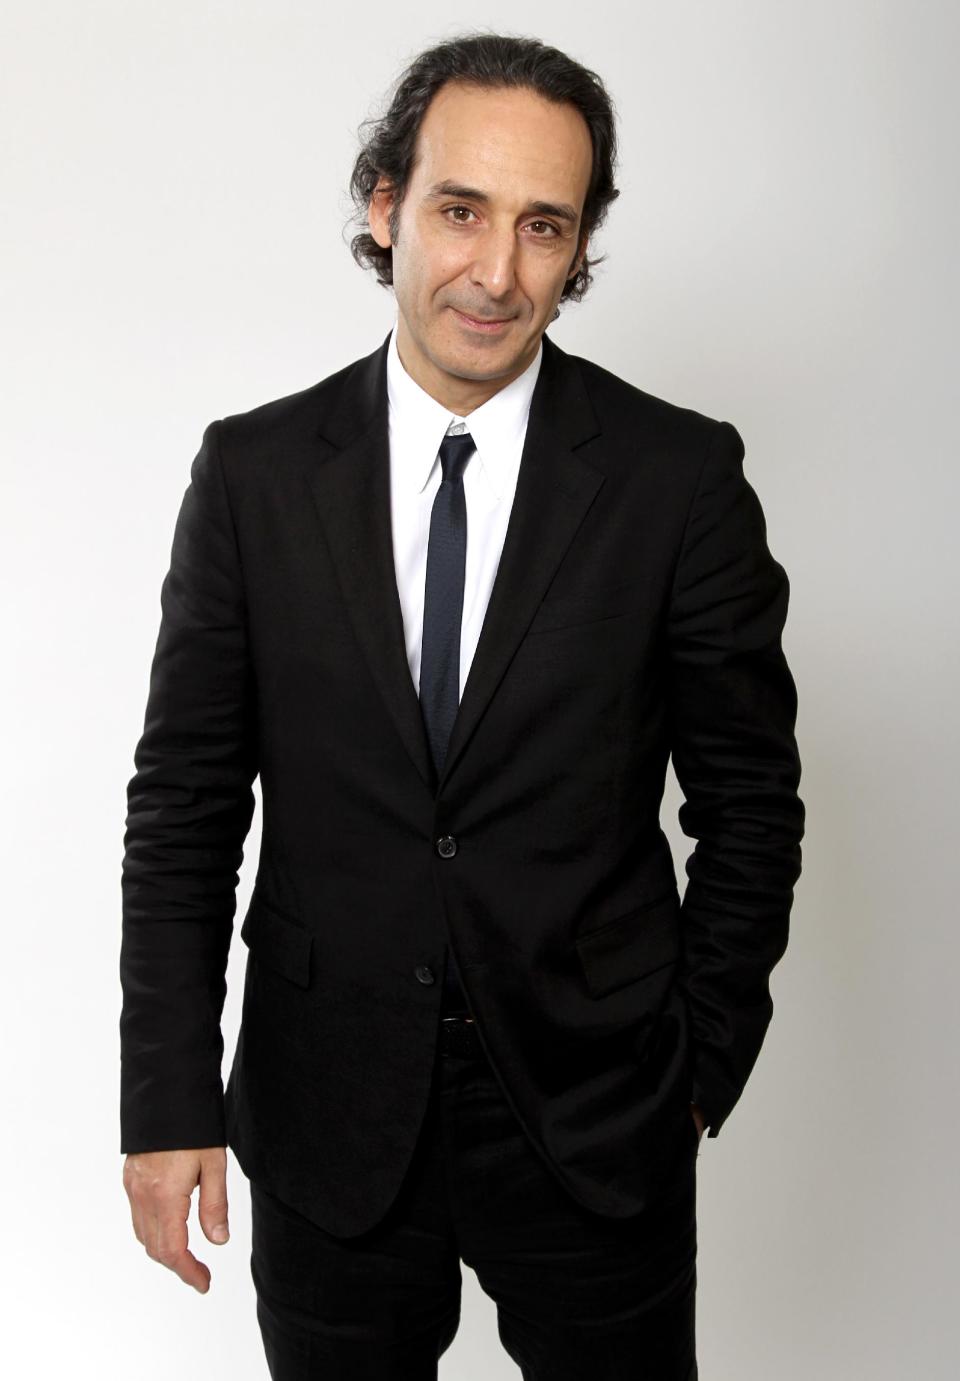 FILE - In this Feb. 4, 2013 file photo, Oscar nominee Alexandre Desplat poses for a portrait at the 2013 Oscar Nominee Luncheon, in Los Angeles. The film academy announced Thursday, Feb. 13, 2014, it plans to present a live Oscar Concert celebrating the year’s nominated composers, including Desplat for "Philomena." Besides music from “Gravity,” “The Book Thief,” “Saving Mr. Banks,” “Philomena” and “Her,” the program will include performances of the four original songs up for Oscars this year. (Photo by Matt Sayles/Invision/AP, file)